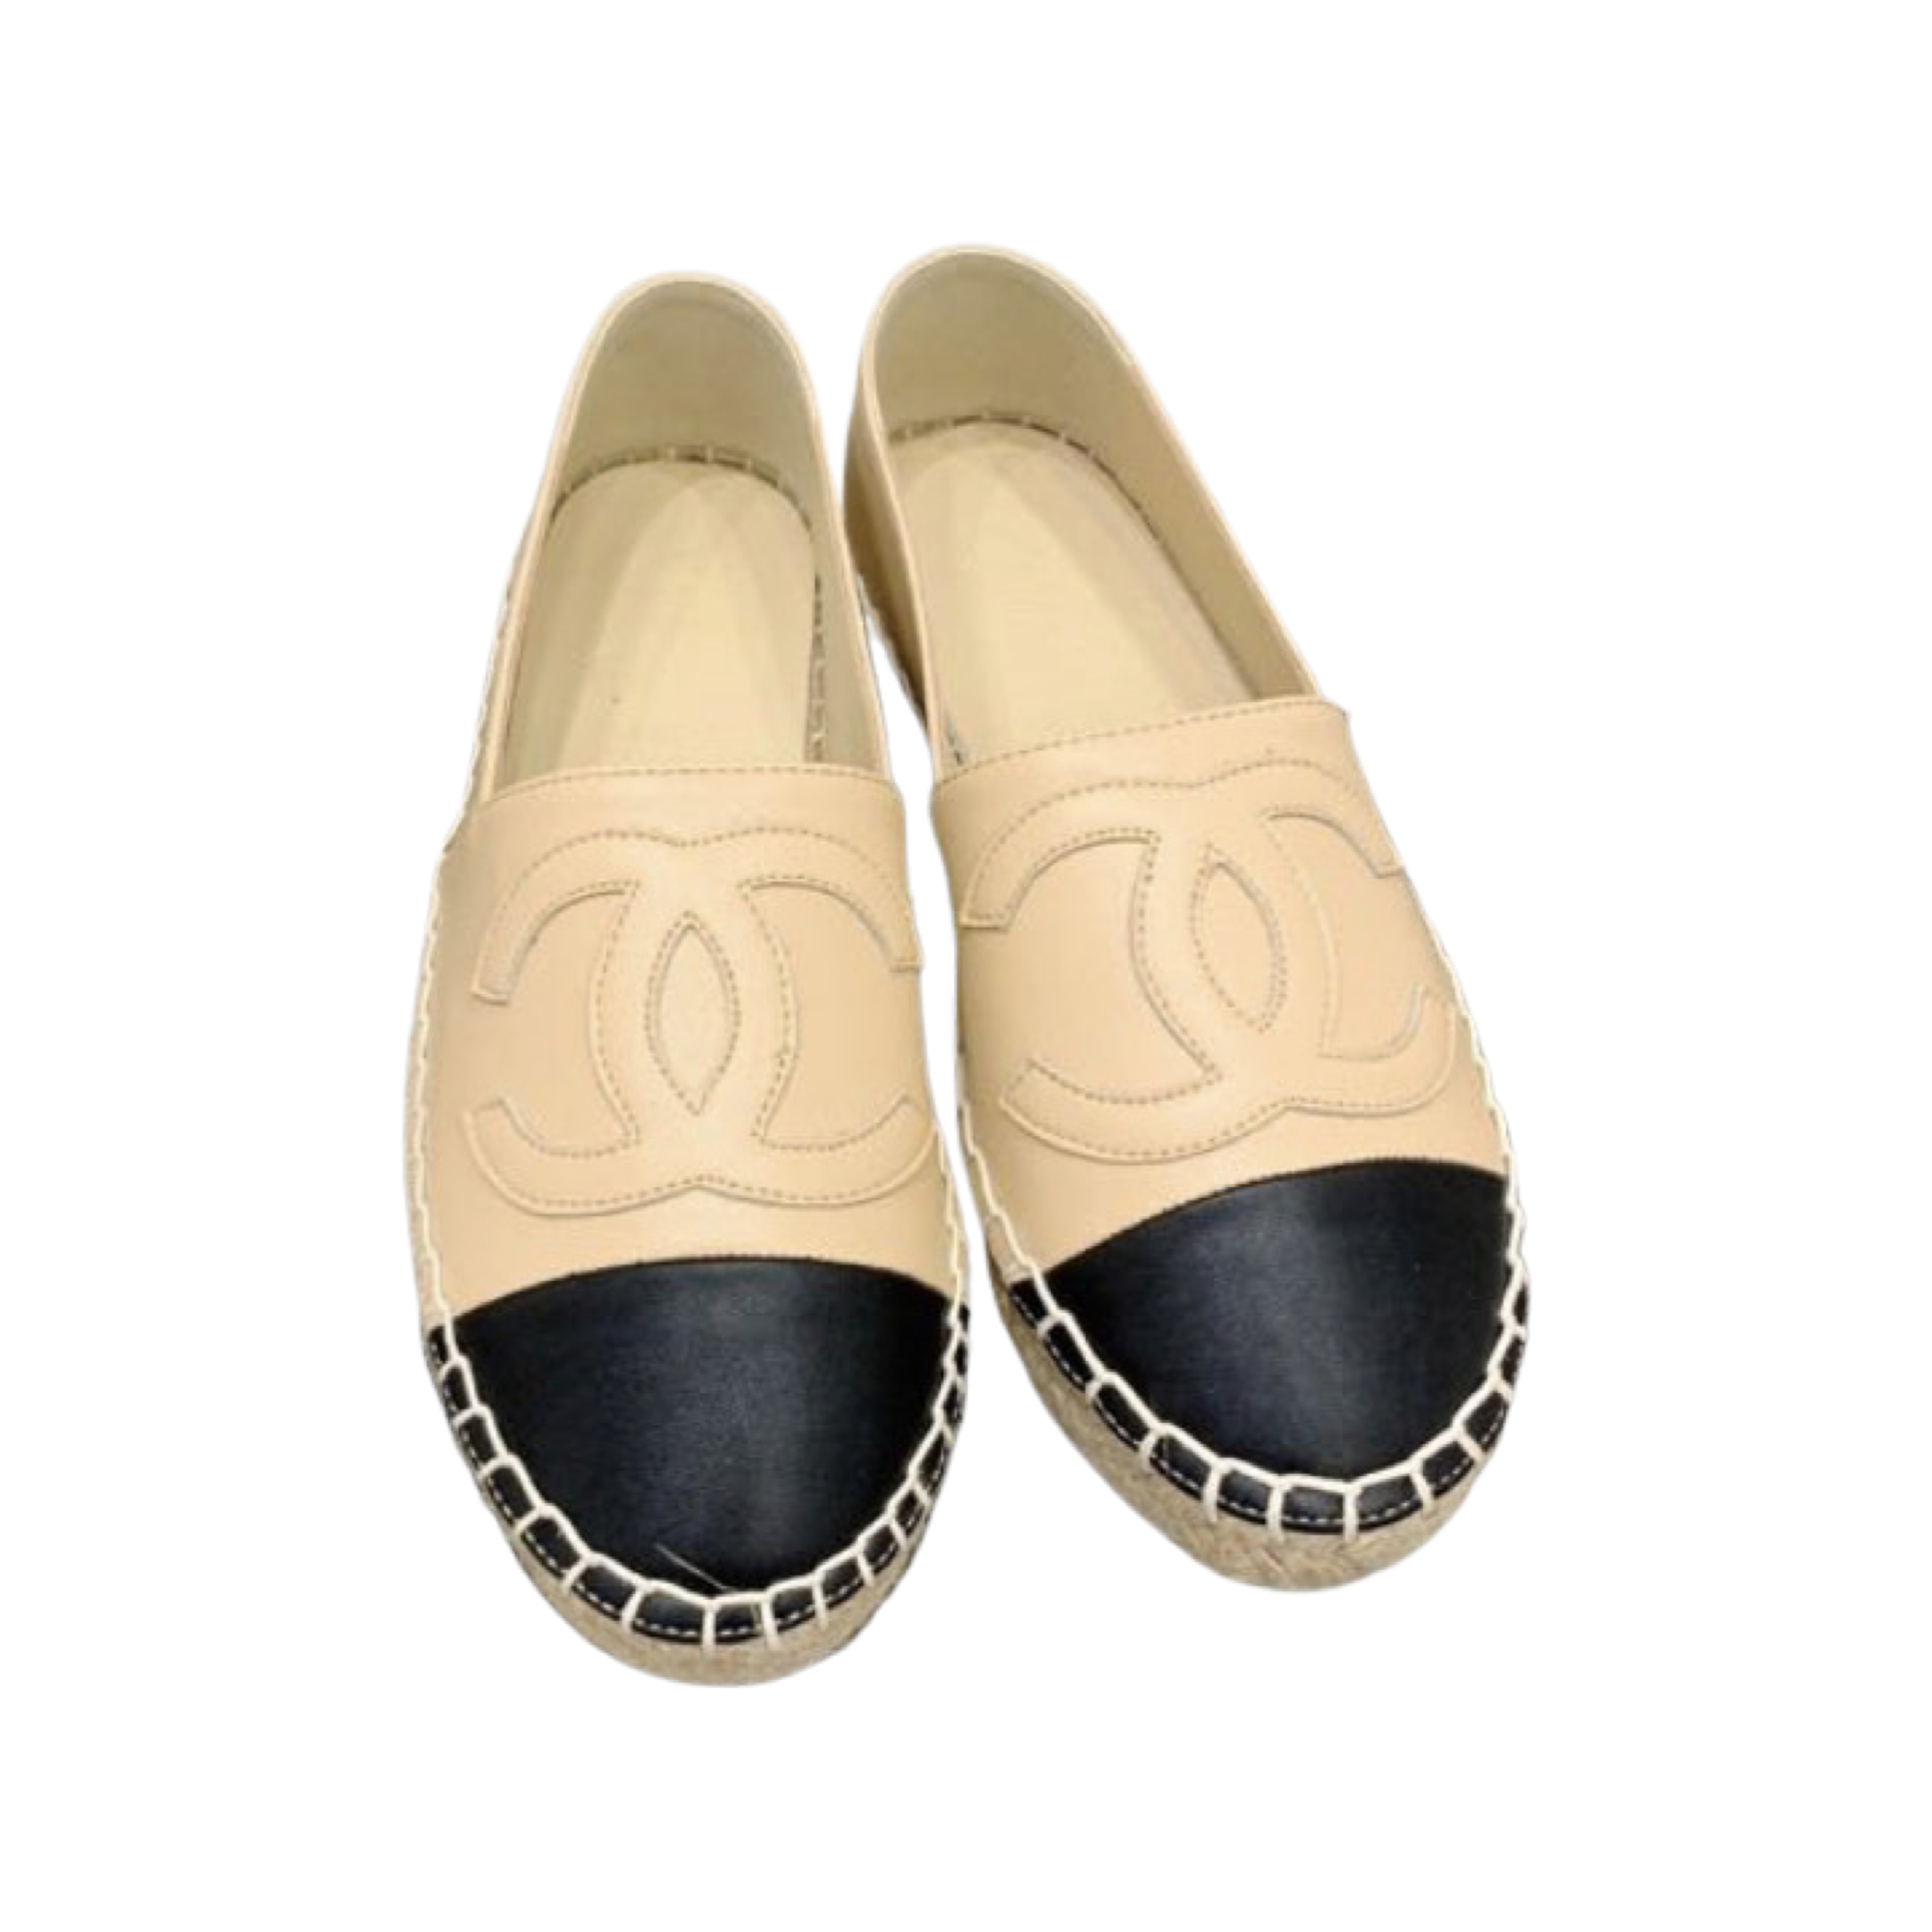 Luxury Loafer